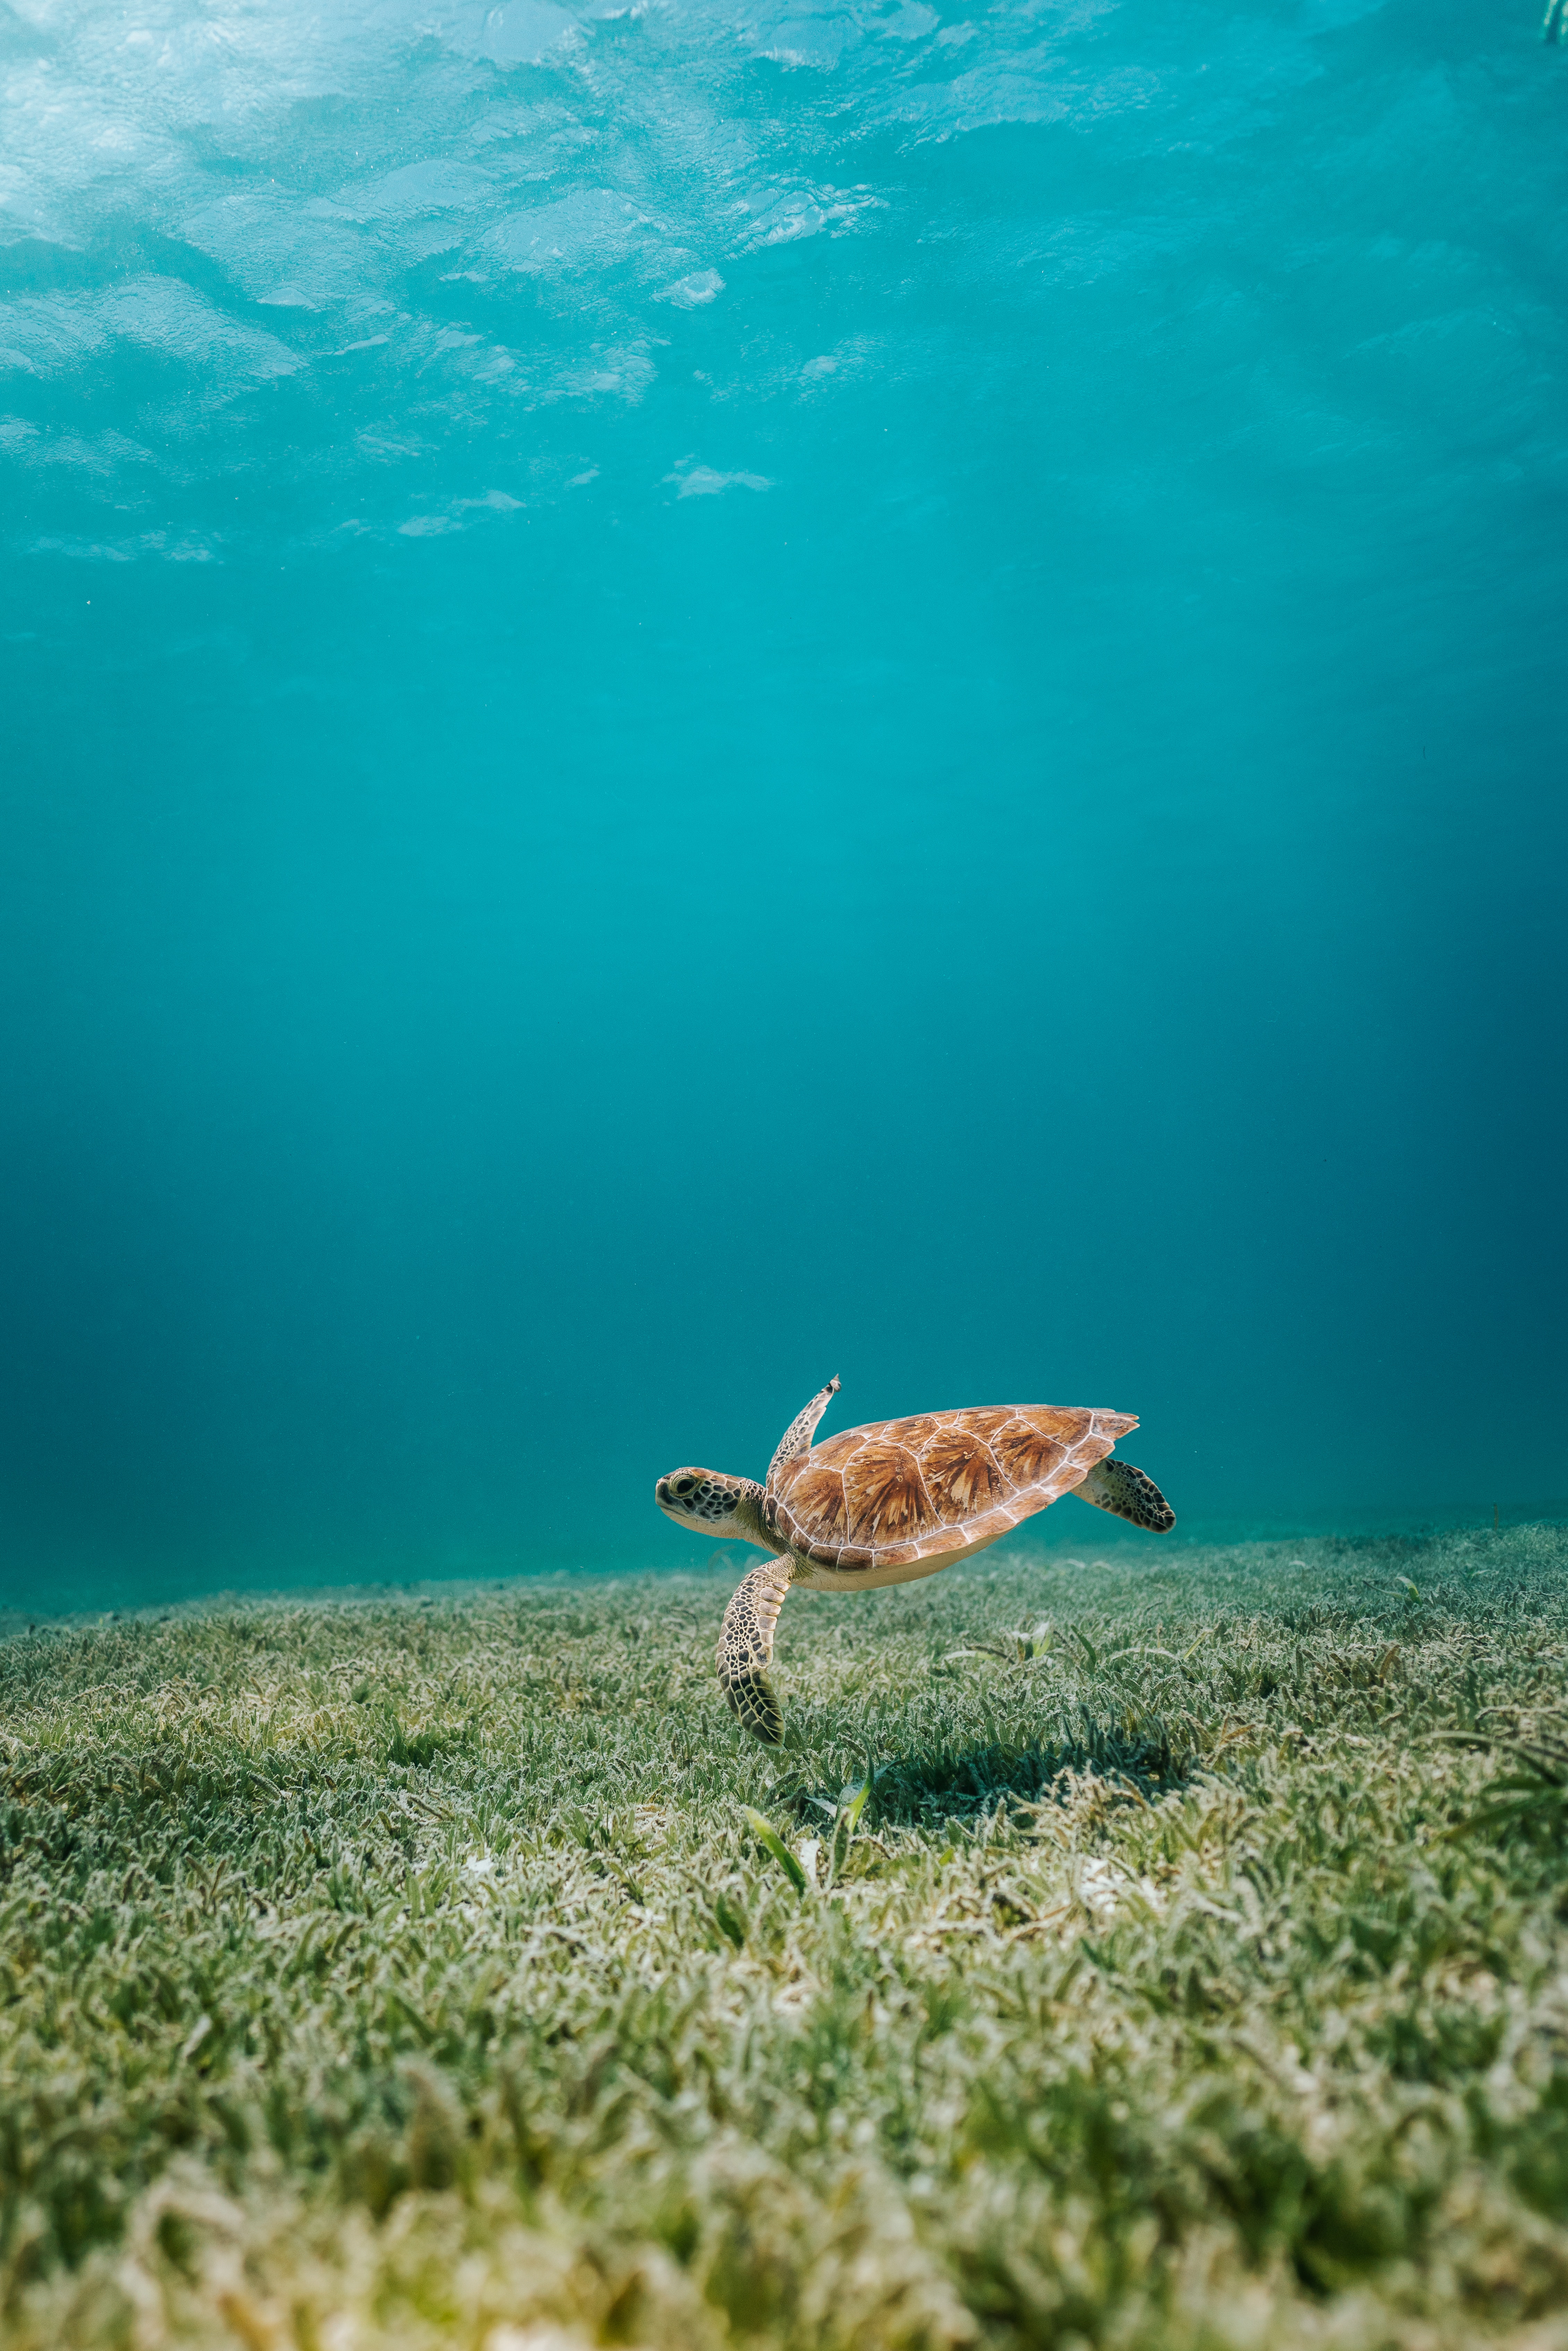 Download Turtle wallpaper for mobile phone, free Turtle HD picture